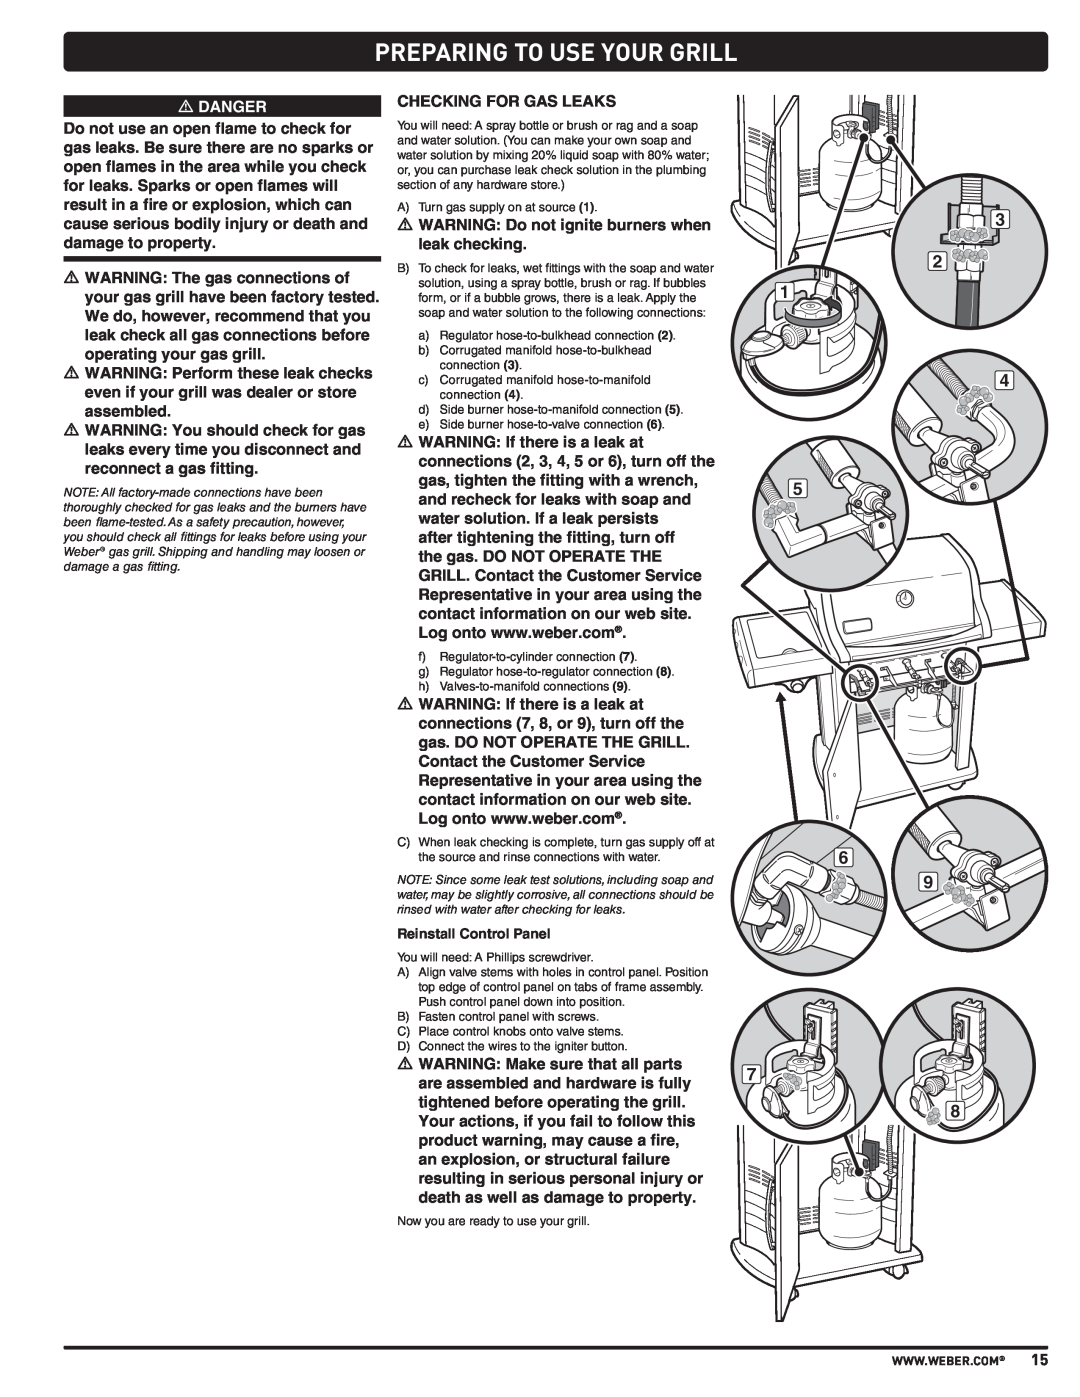 Weber PL - PG. 59 57205 manual Preparing To Use Your Grill, m DANGER, Checking For Gas Leaks 